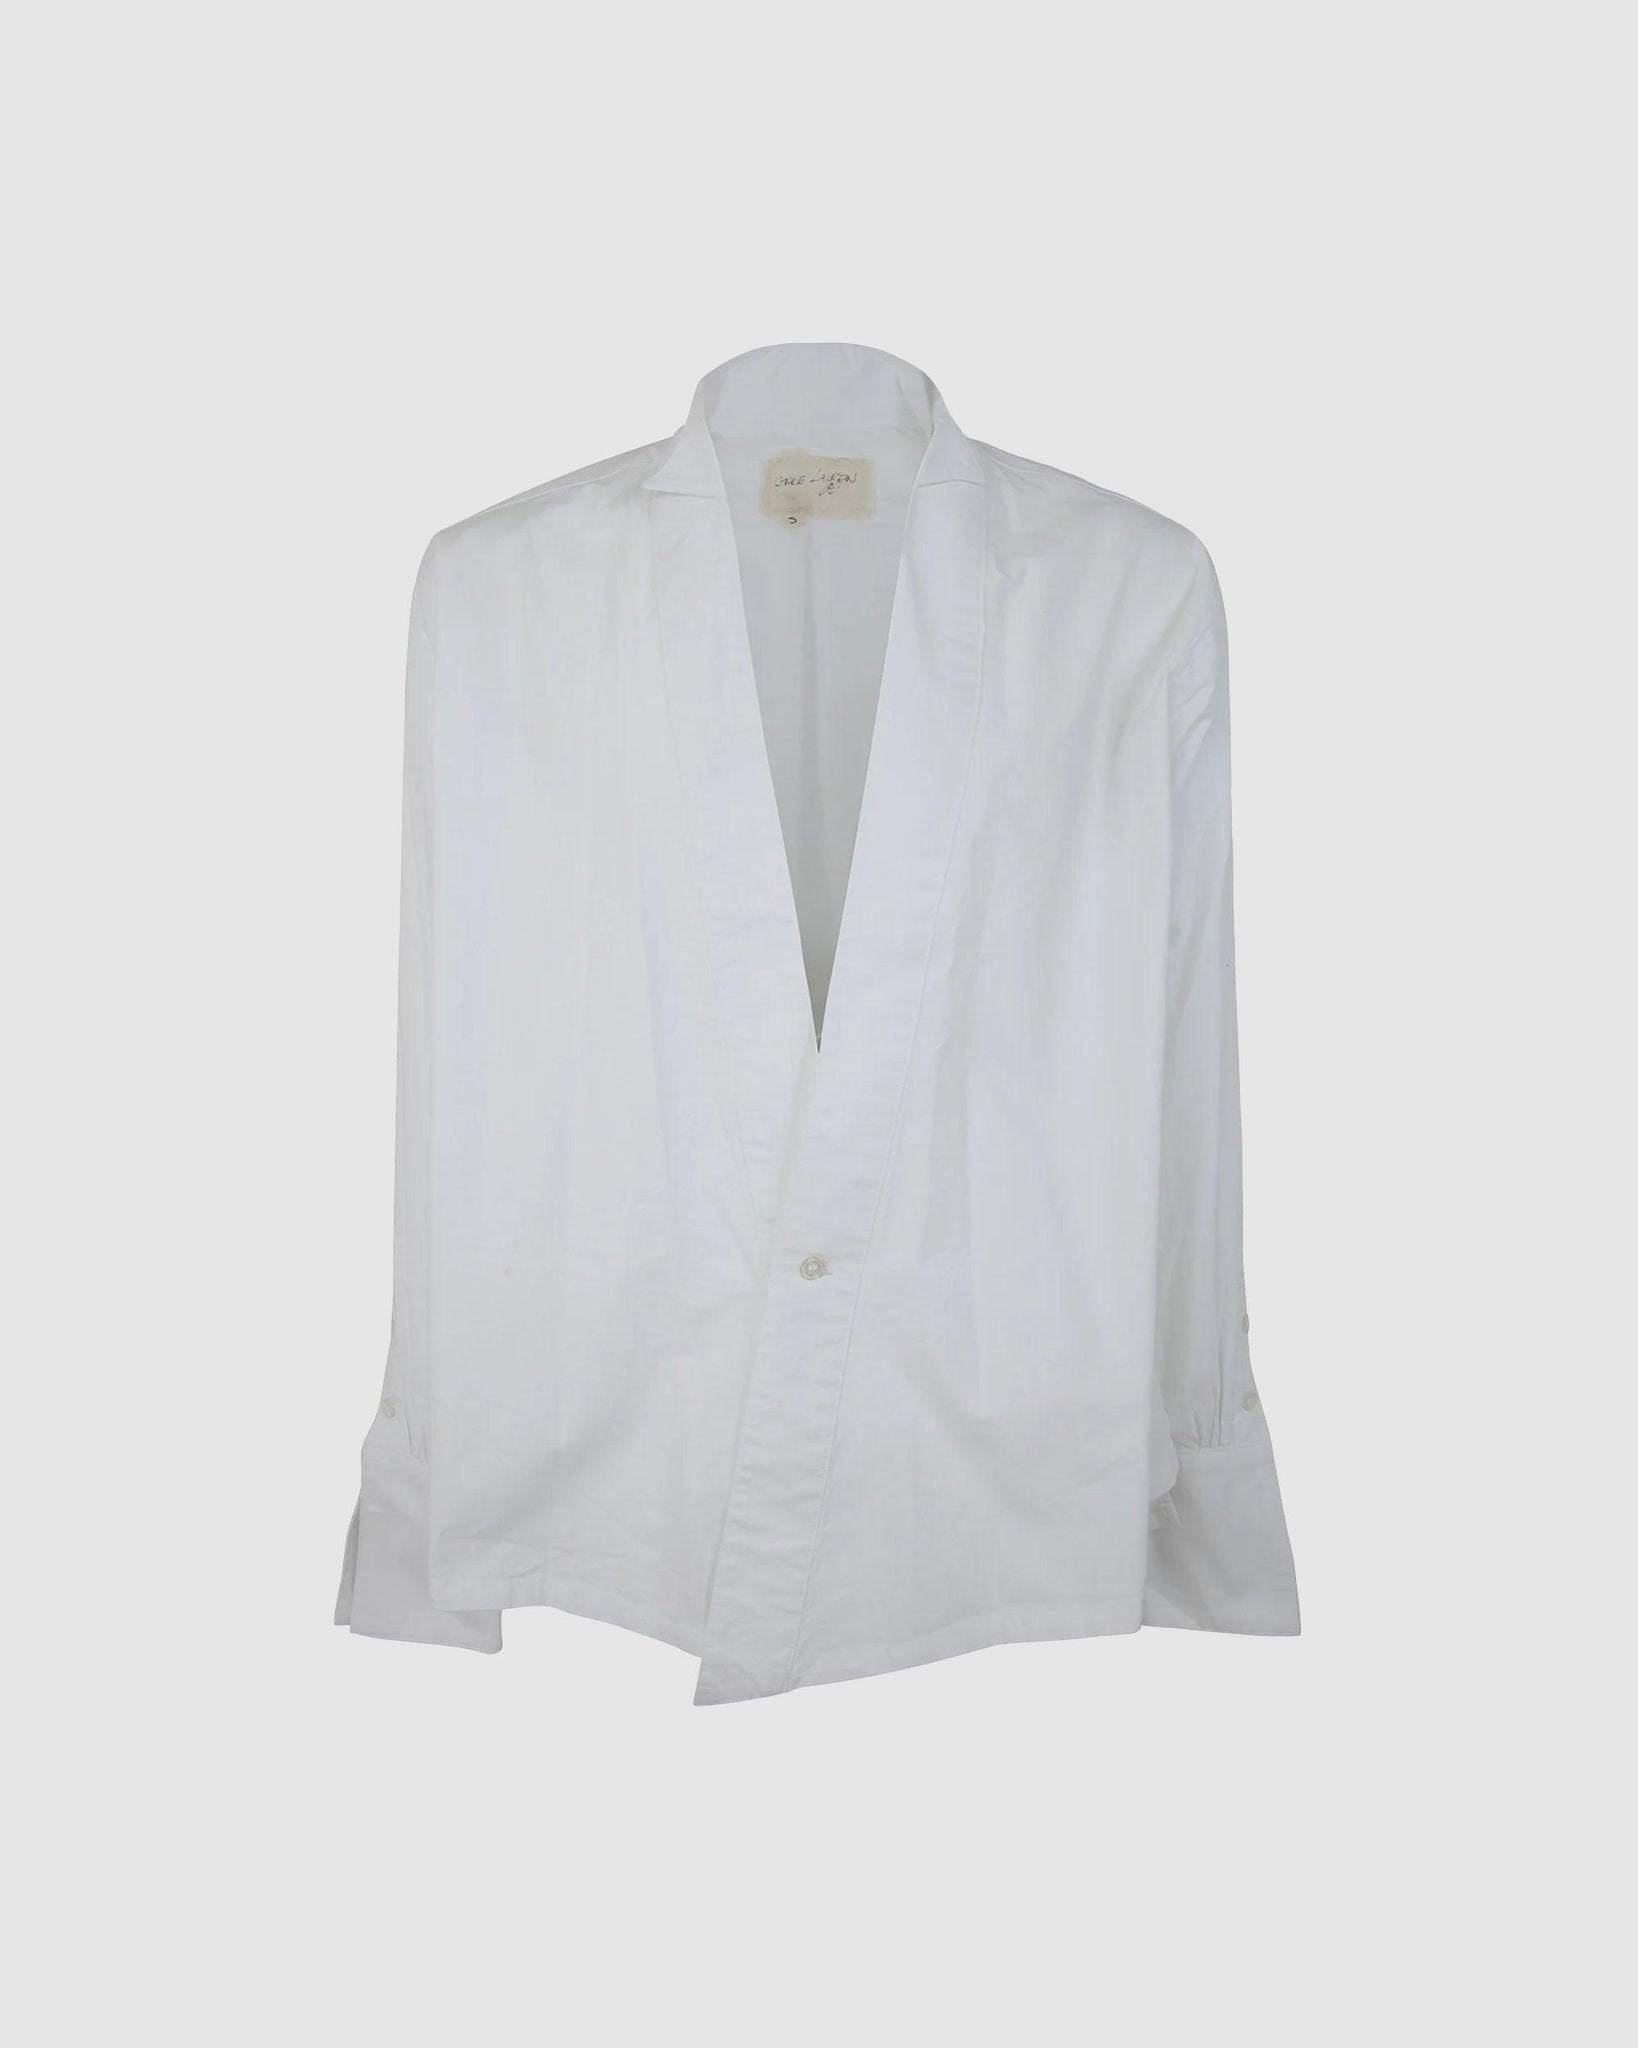 Military Cotton Winged GL1 White Shirt - {{ collection.title }} - Chinatown Country Club 